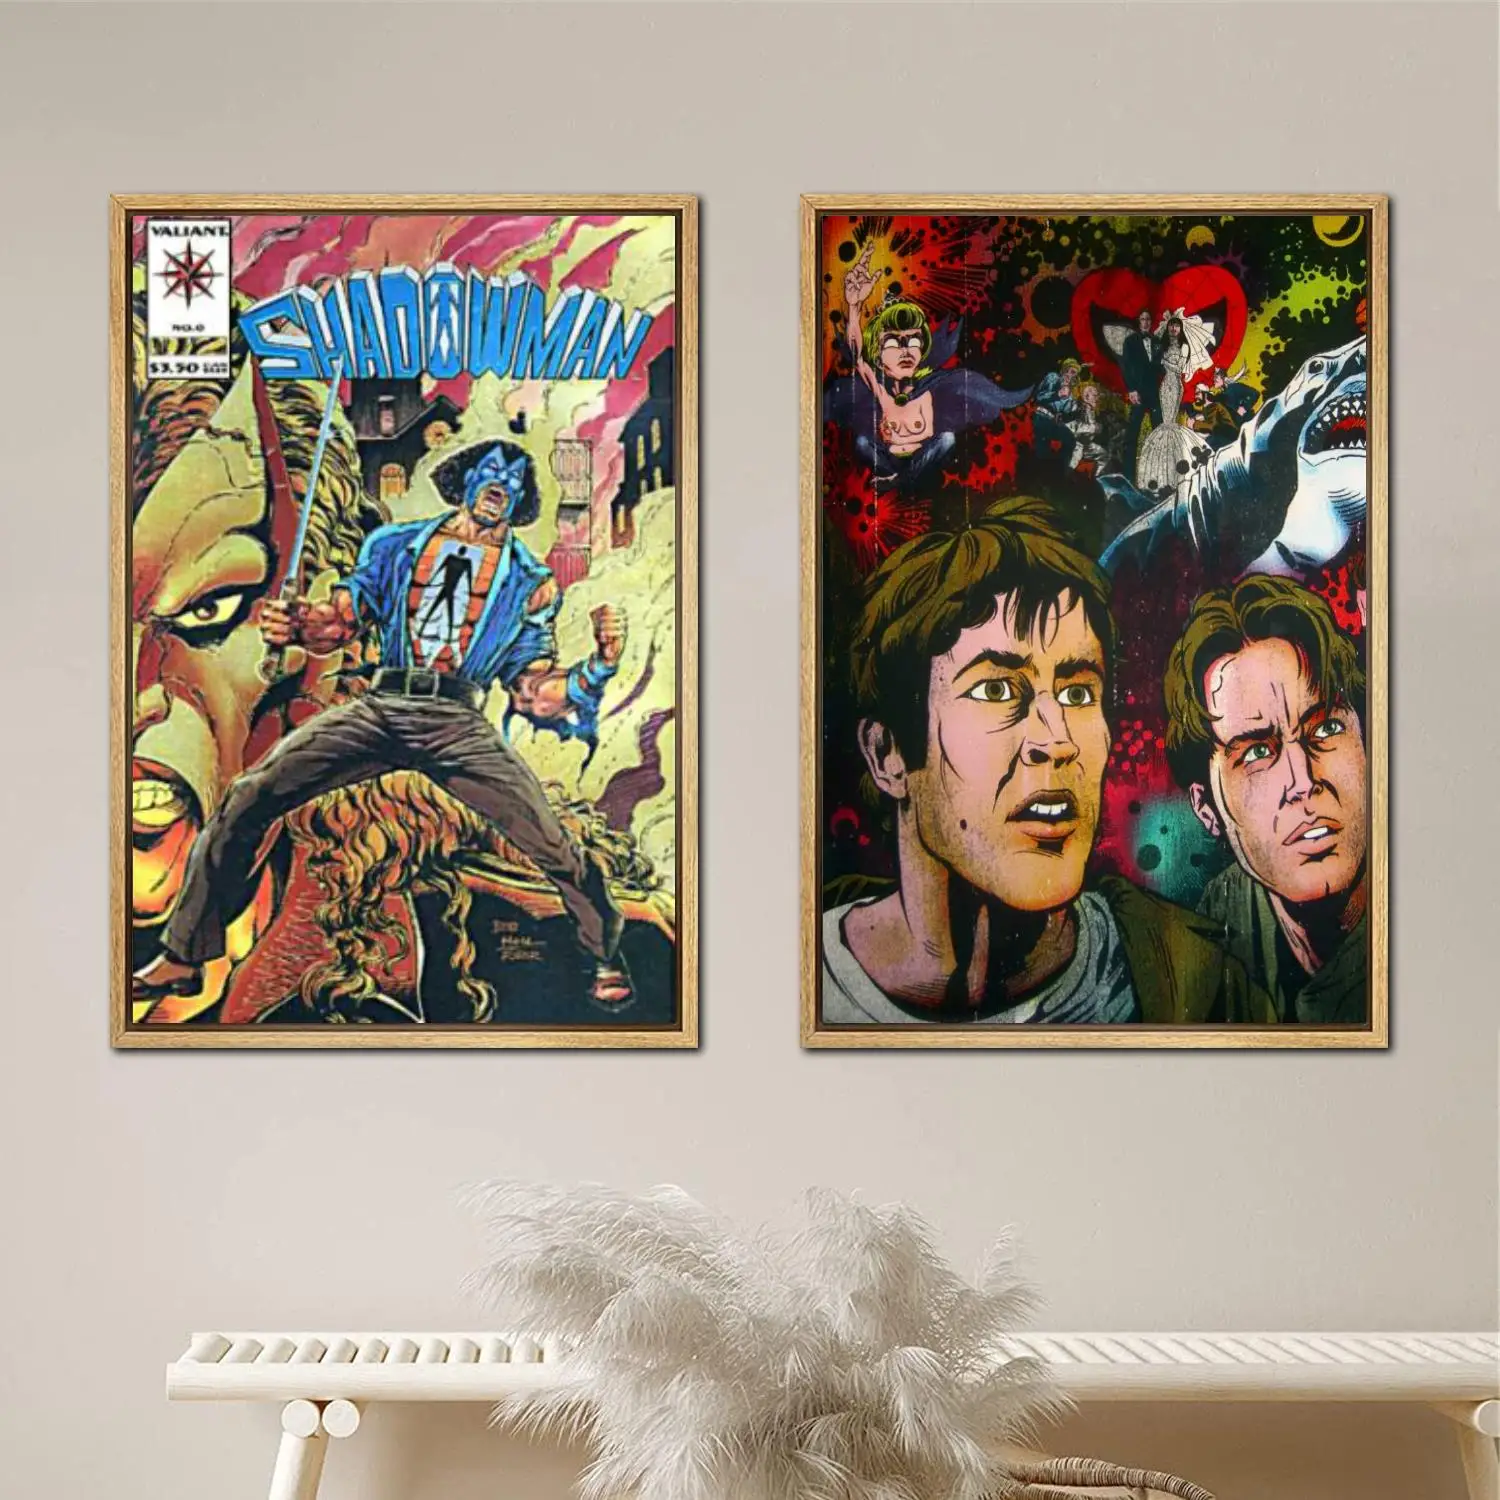 mallrats Poster Painting 24x36 Wall Art Canvas Posters room decor Modern Family bedroom Decoration Art wall decor